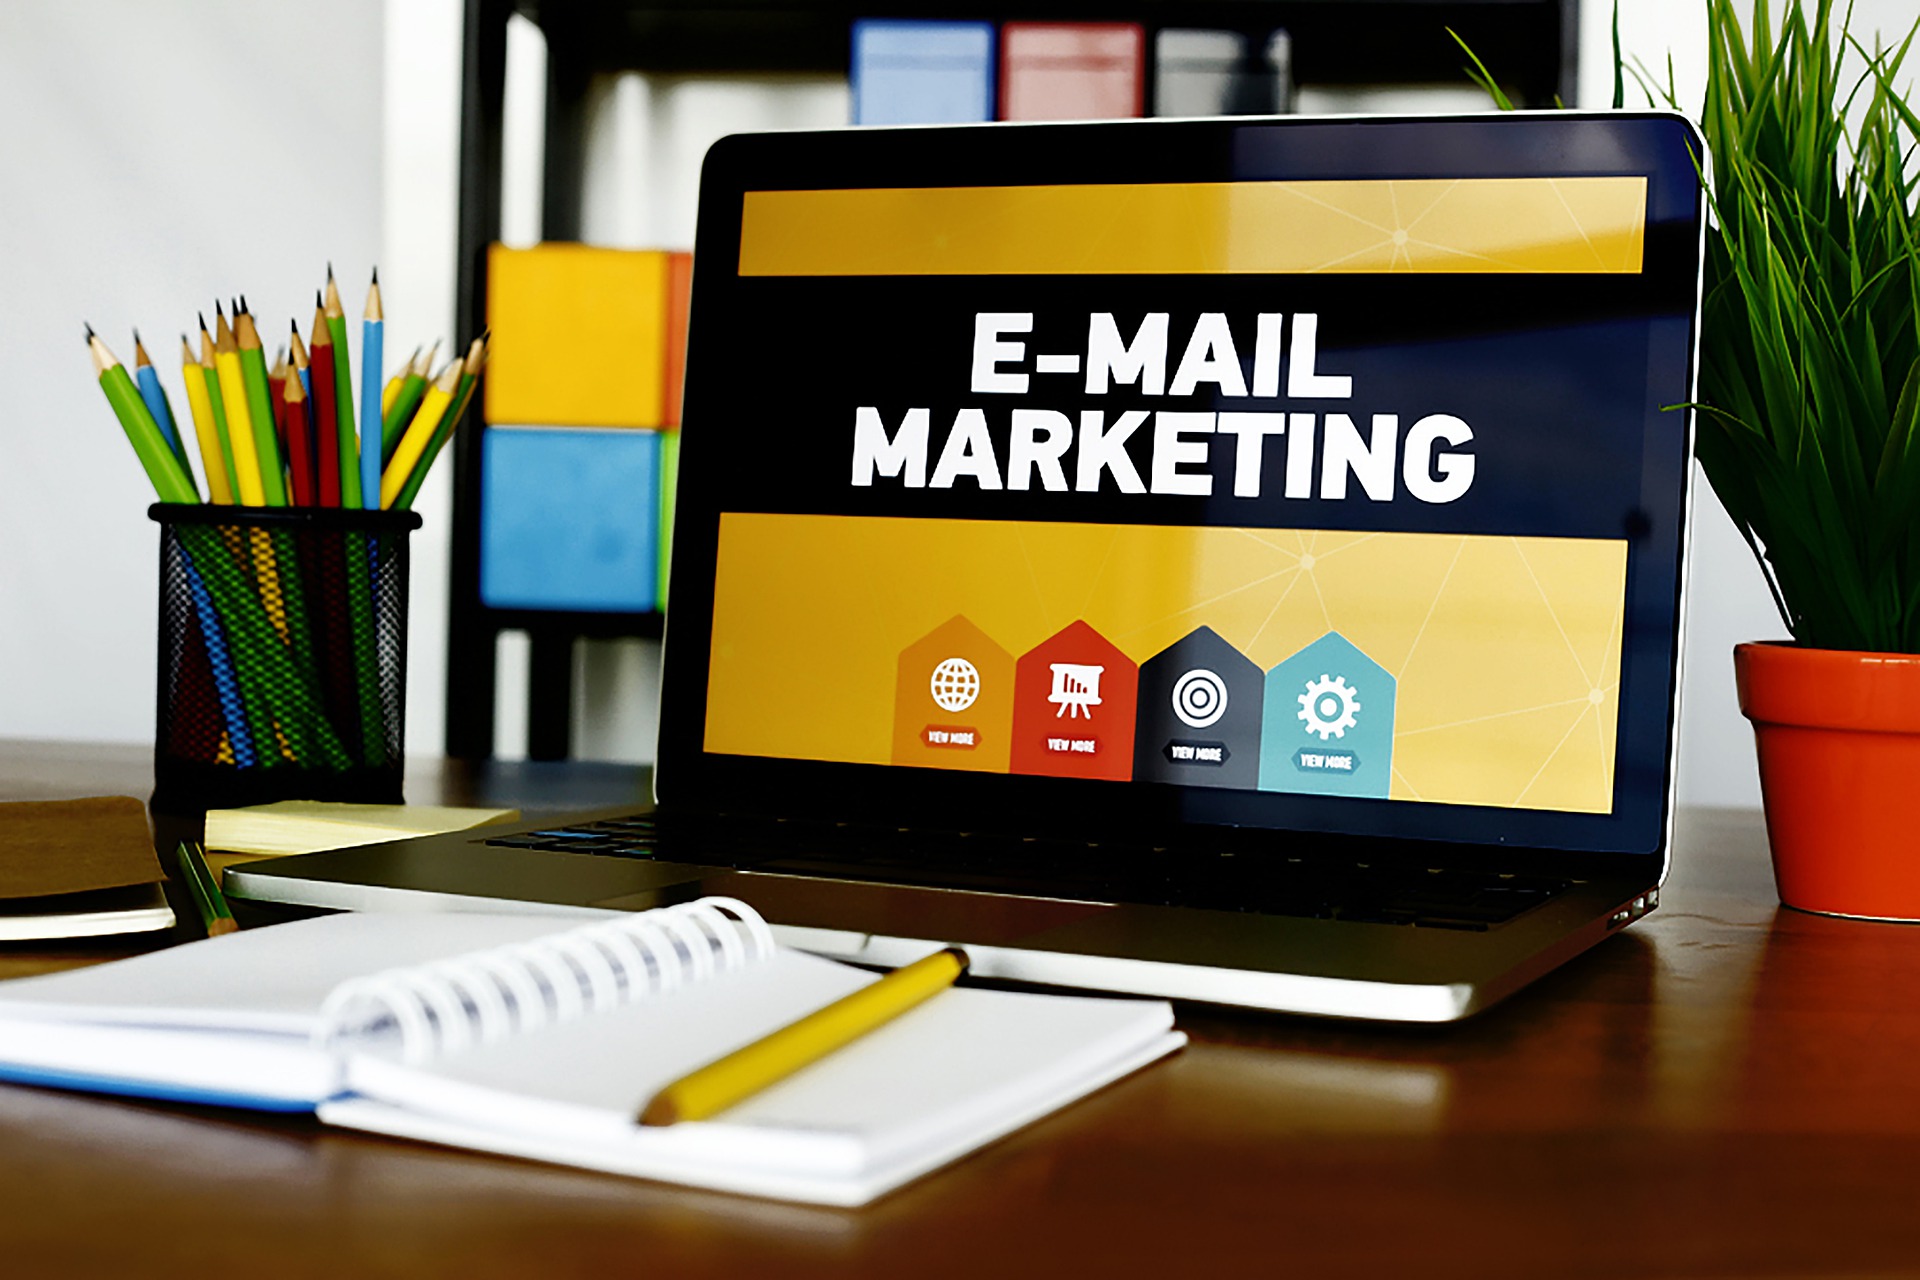 email marketing strategy to send emails on old email list 1